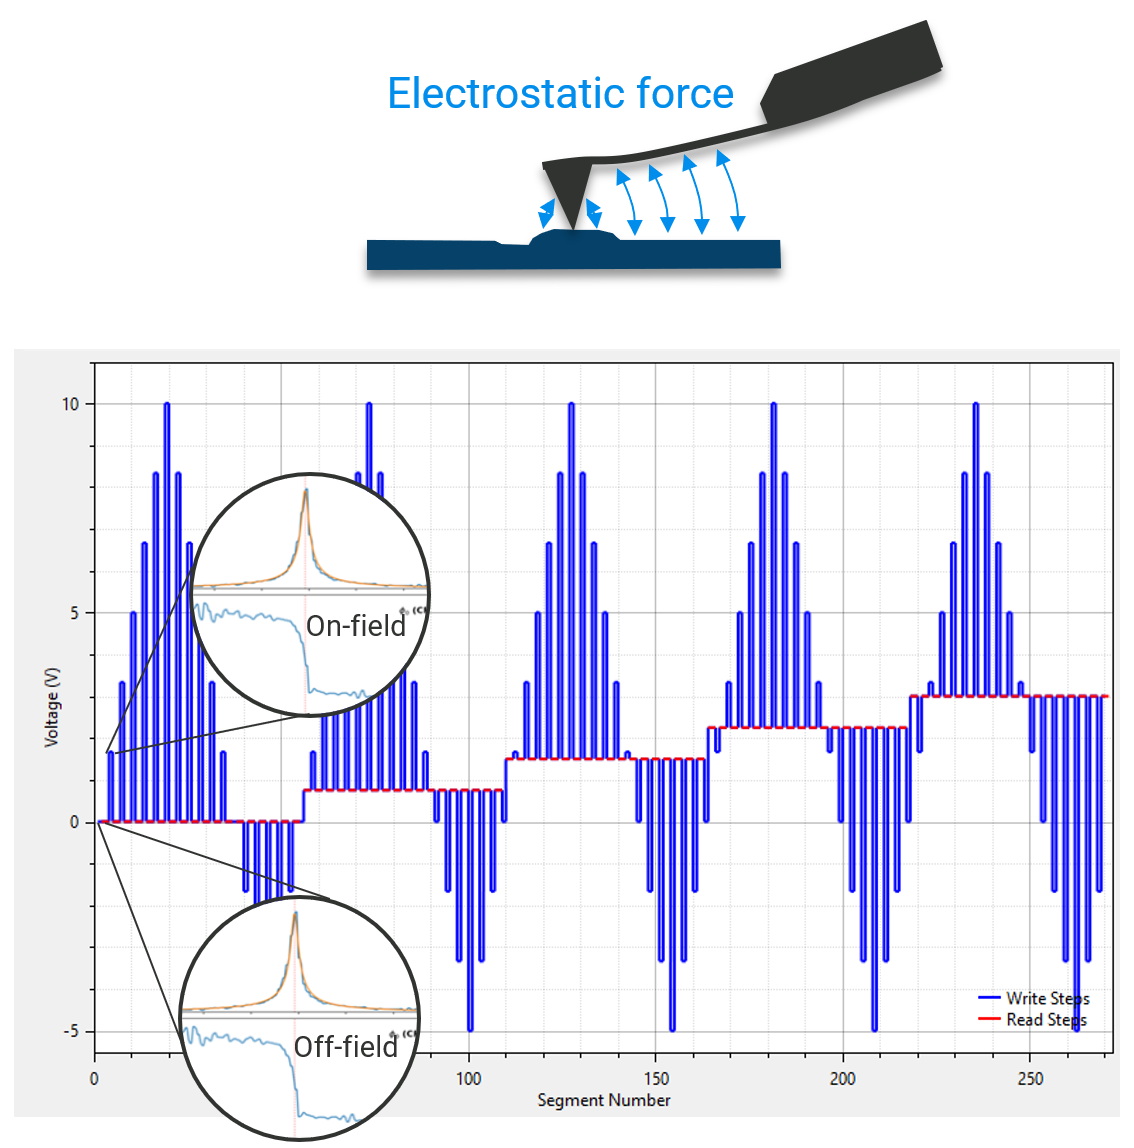 Top: The electrostatic force, represented by blue arrows between the cantilever and sample surface, between the cantilever and the sample creates an artifact by influencing the PFM response. Bottom: Using a switching waveform, called the SS-PFM probing waveform, which contains multiple different read voltages, one can compensate for the electrostatic artifact.